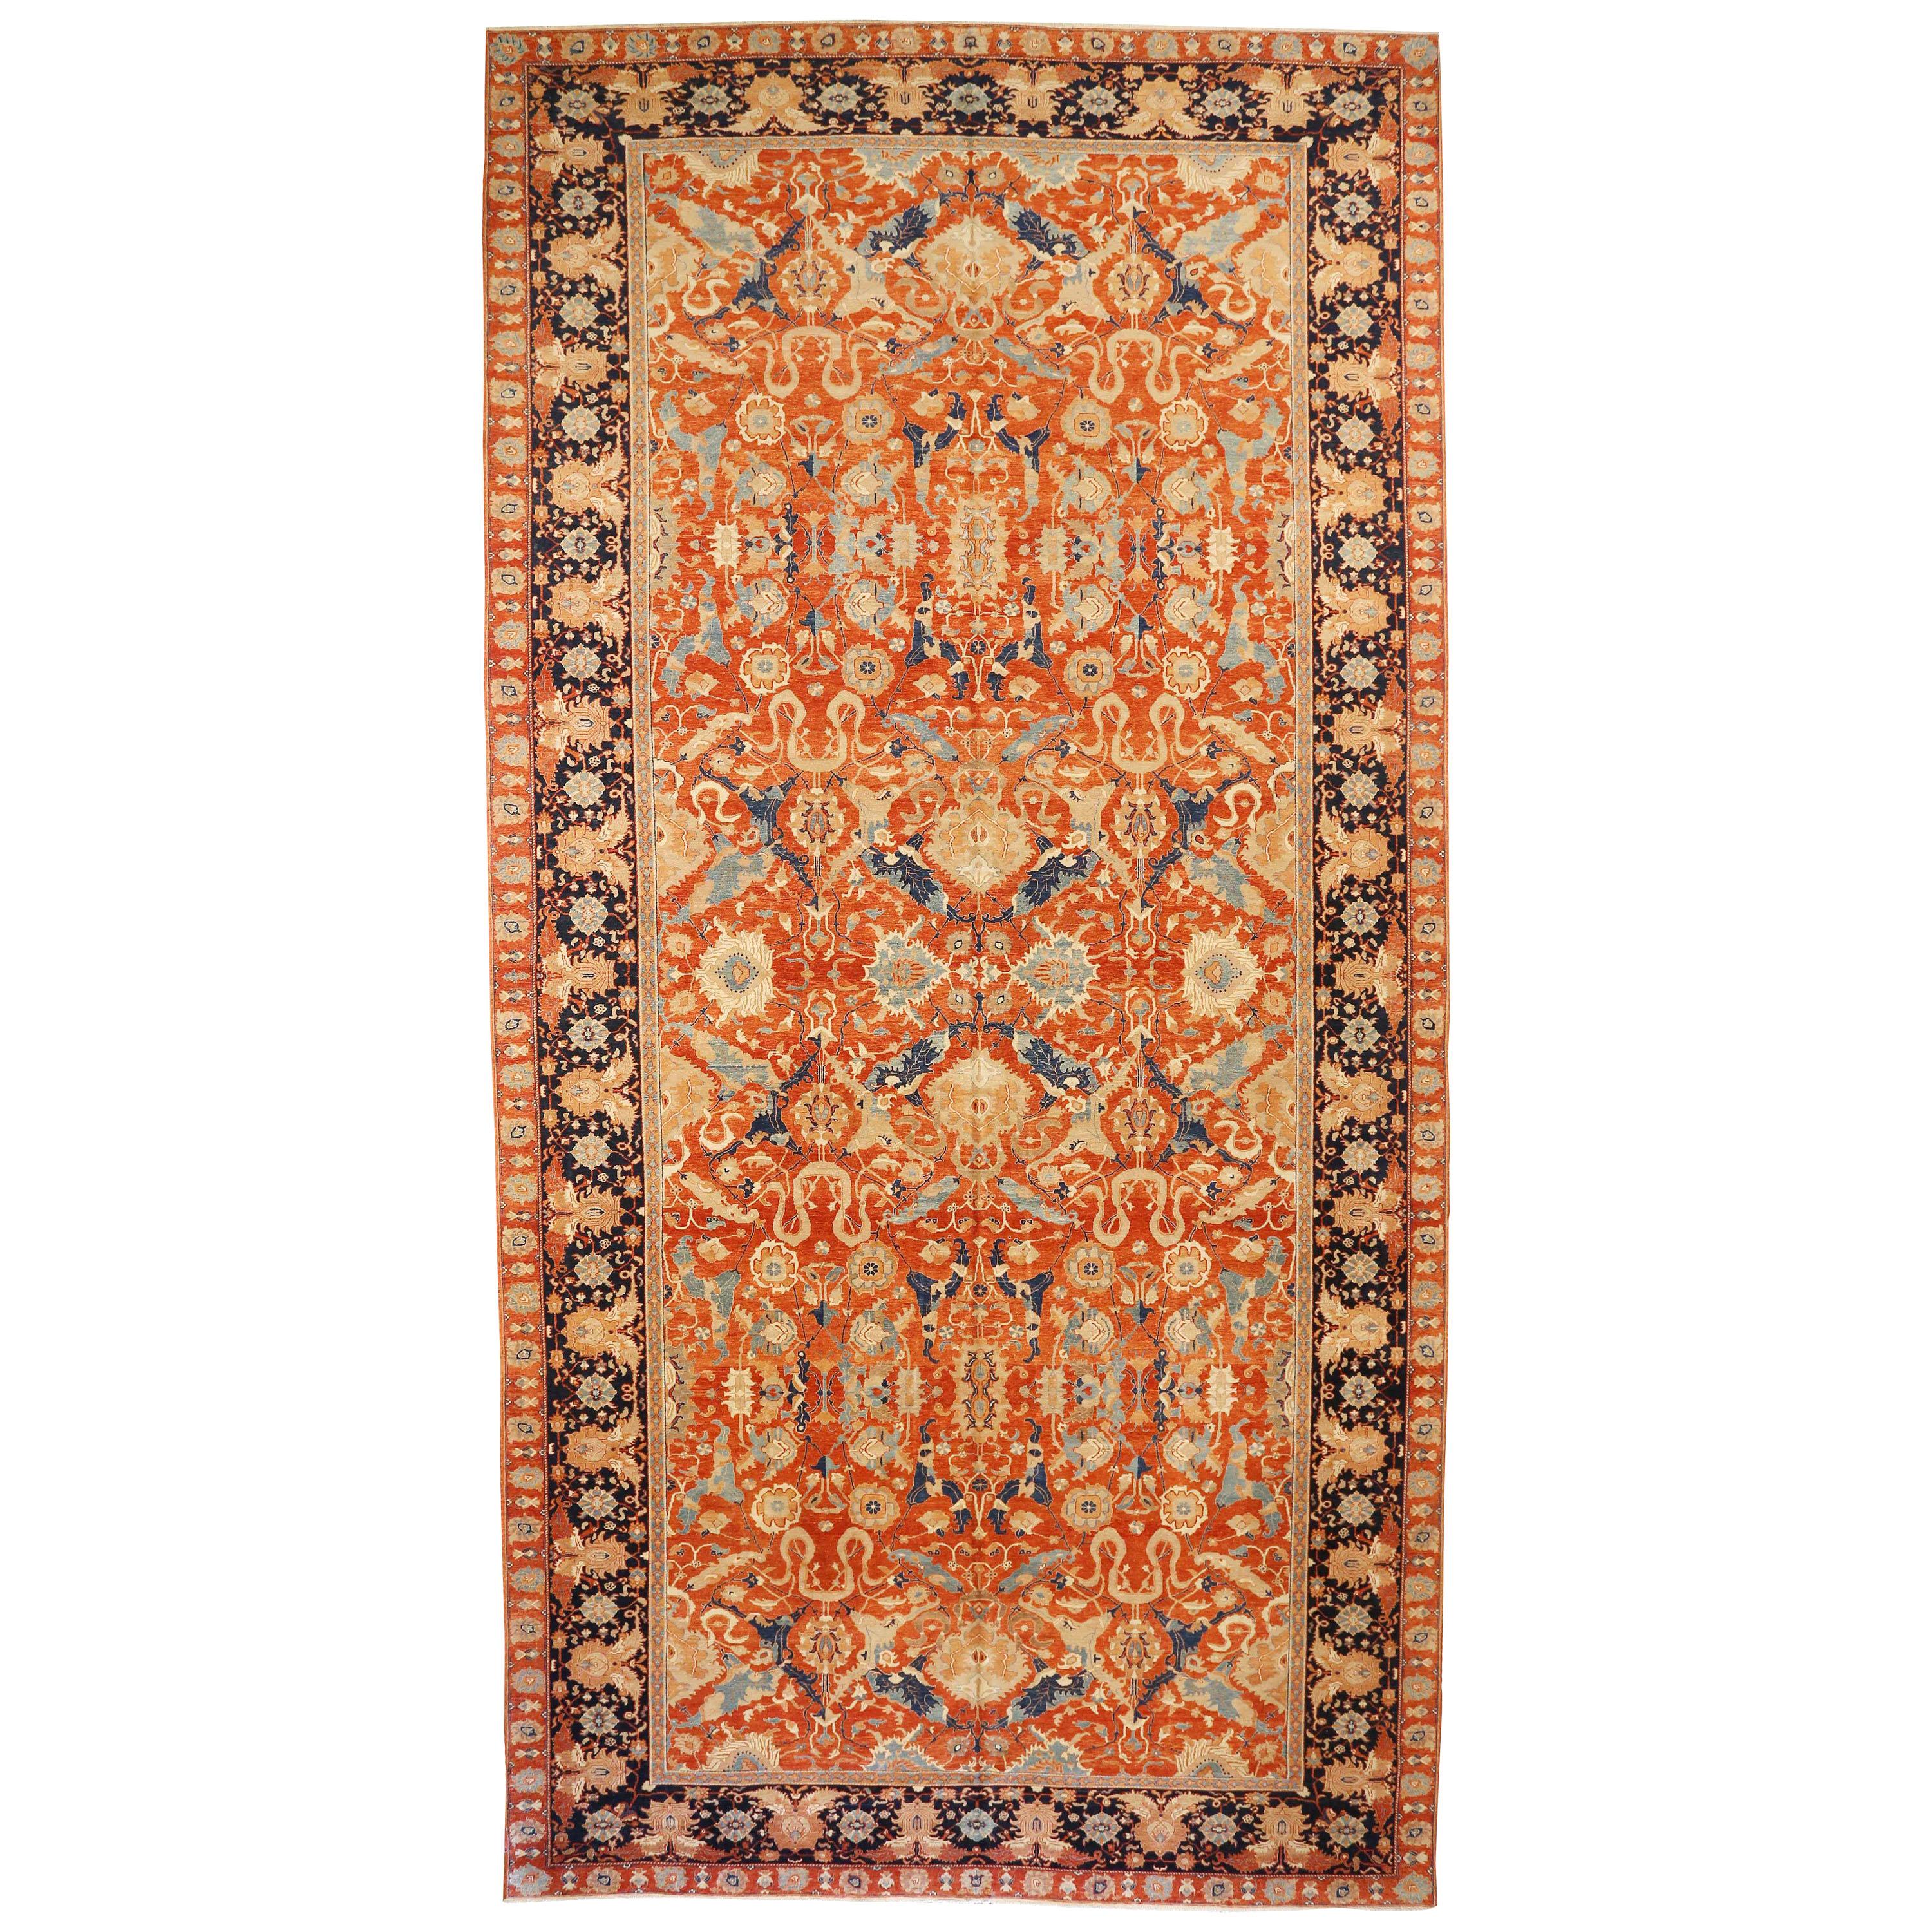 Contemporary Farahan Style Rug with Navy and Gray Floral Details on Orange Field